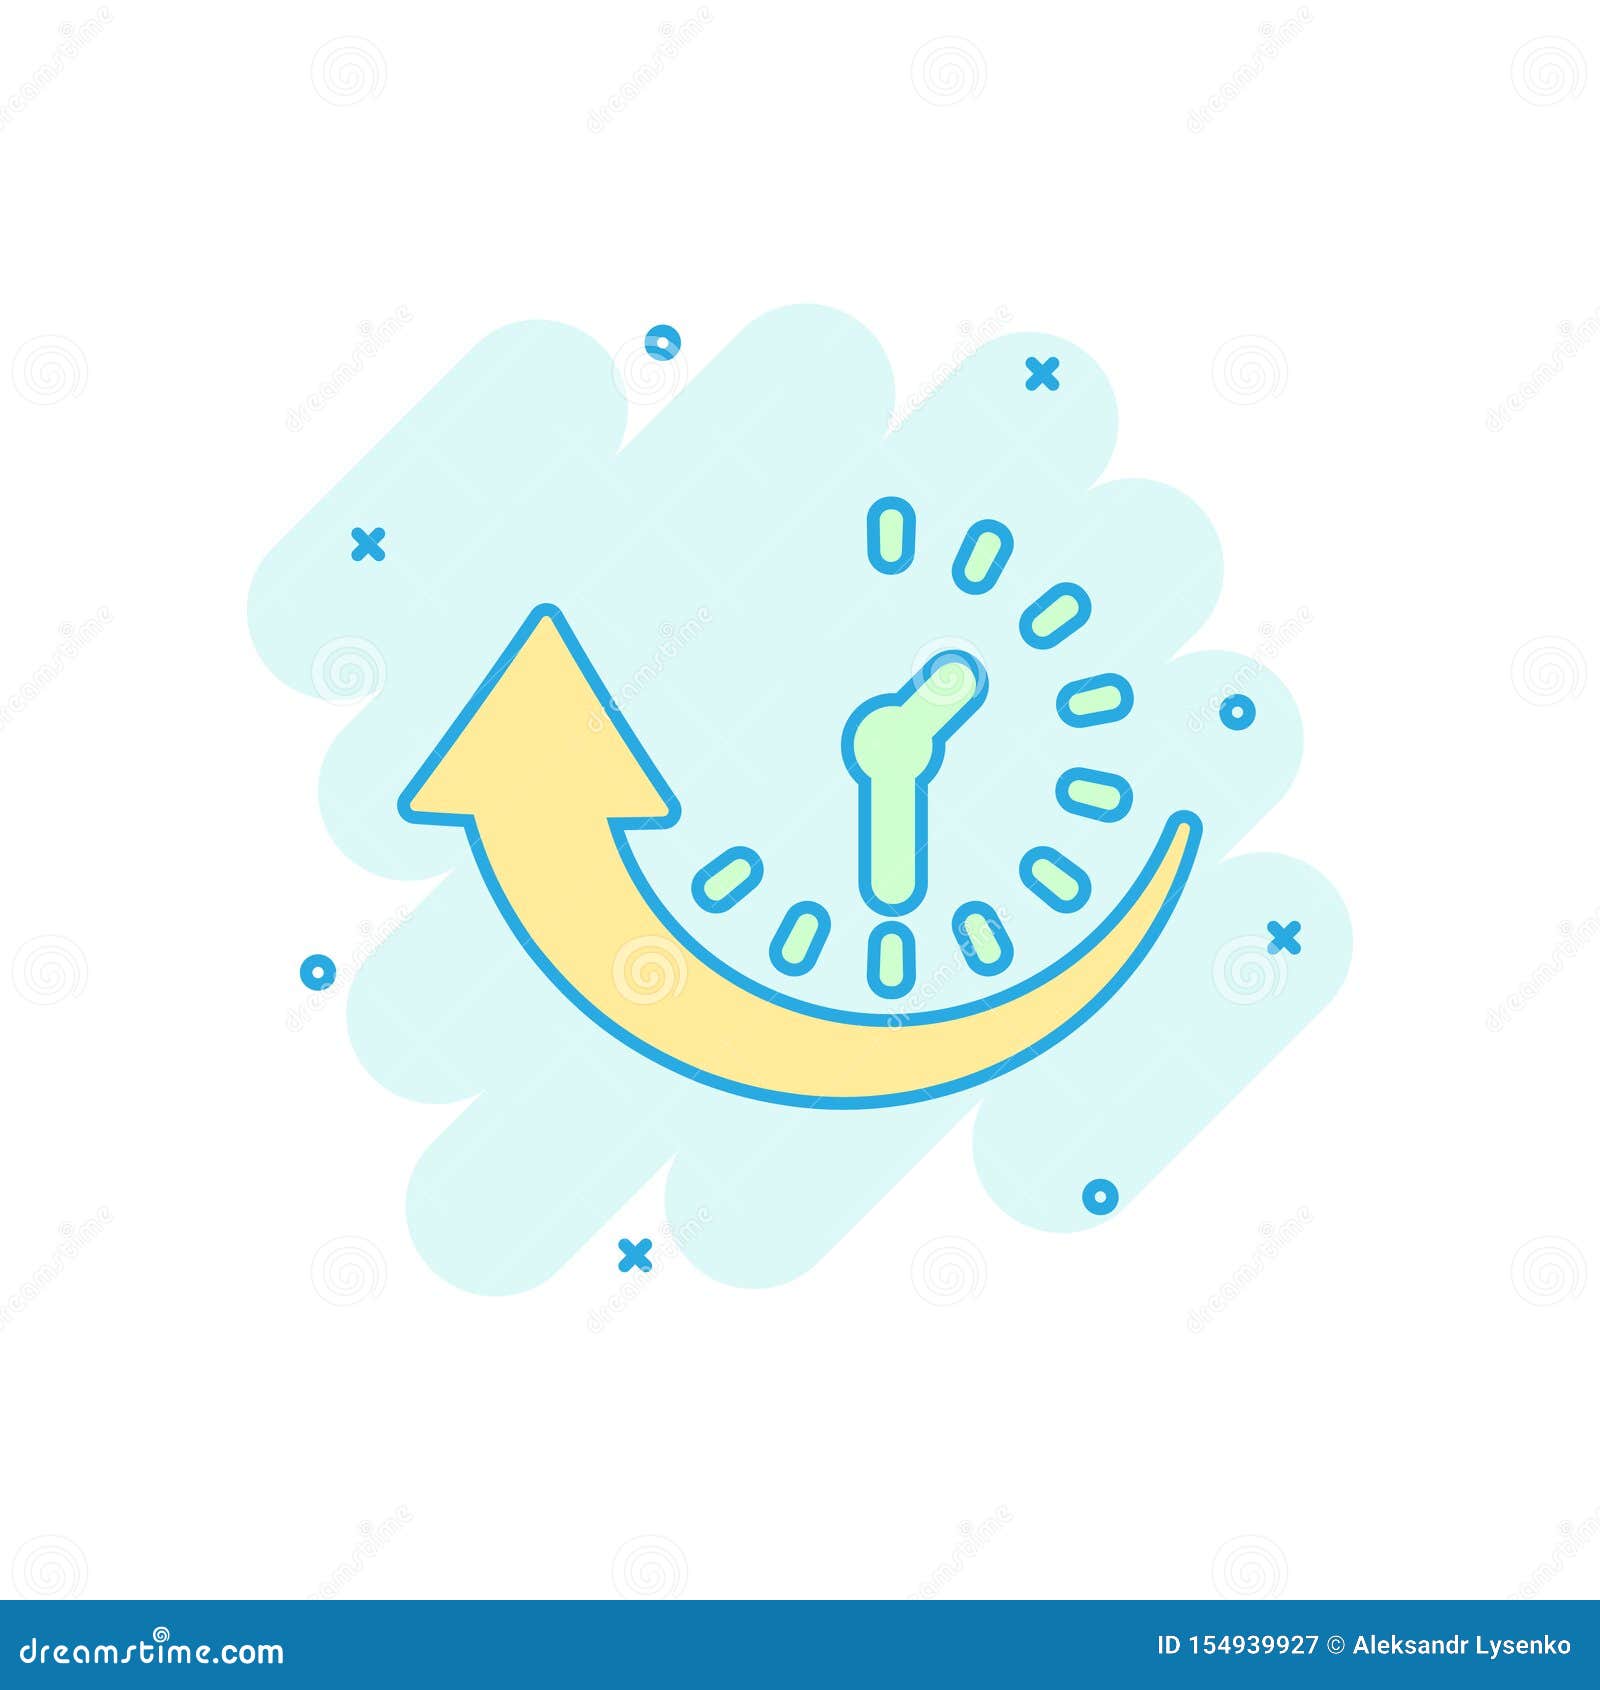 downtime icon in comic style. uptime  cartoon  on white  background. clock business concept splash